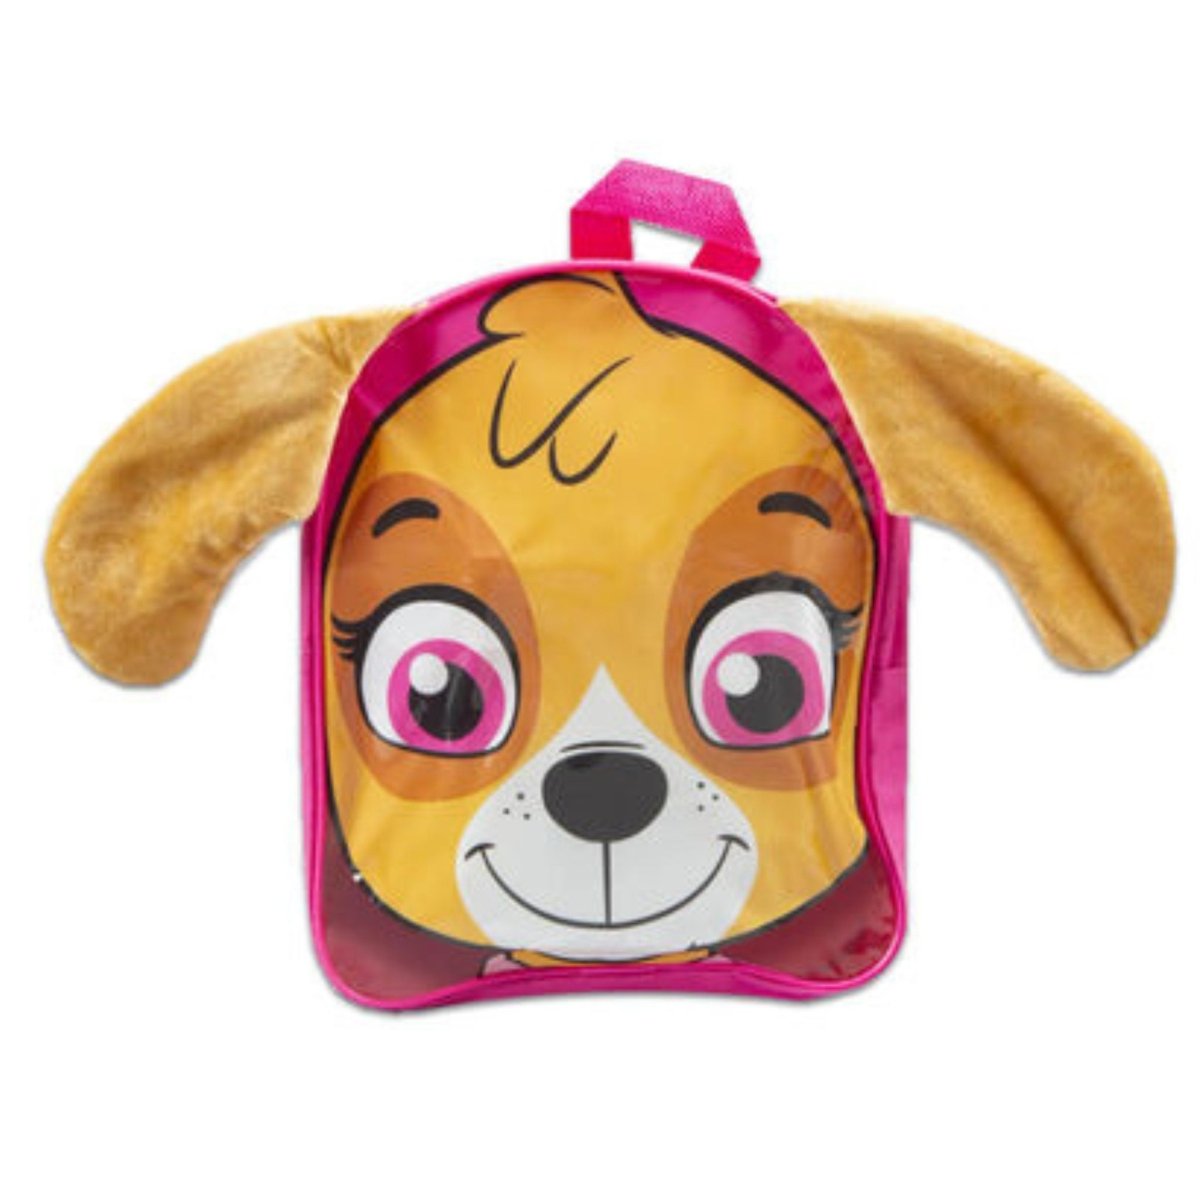 Paw Patrol Craft Backpack: Chase or Skye - Kids Party Craft